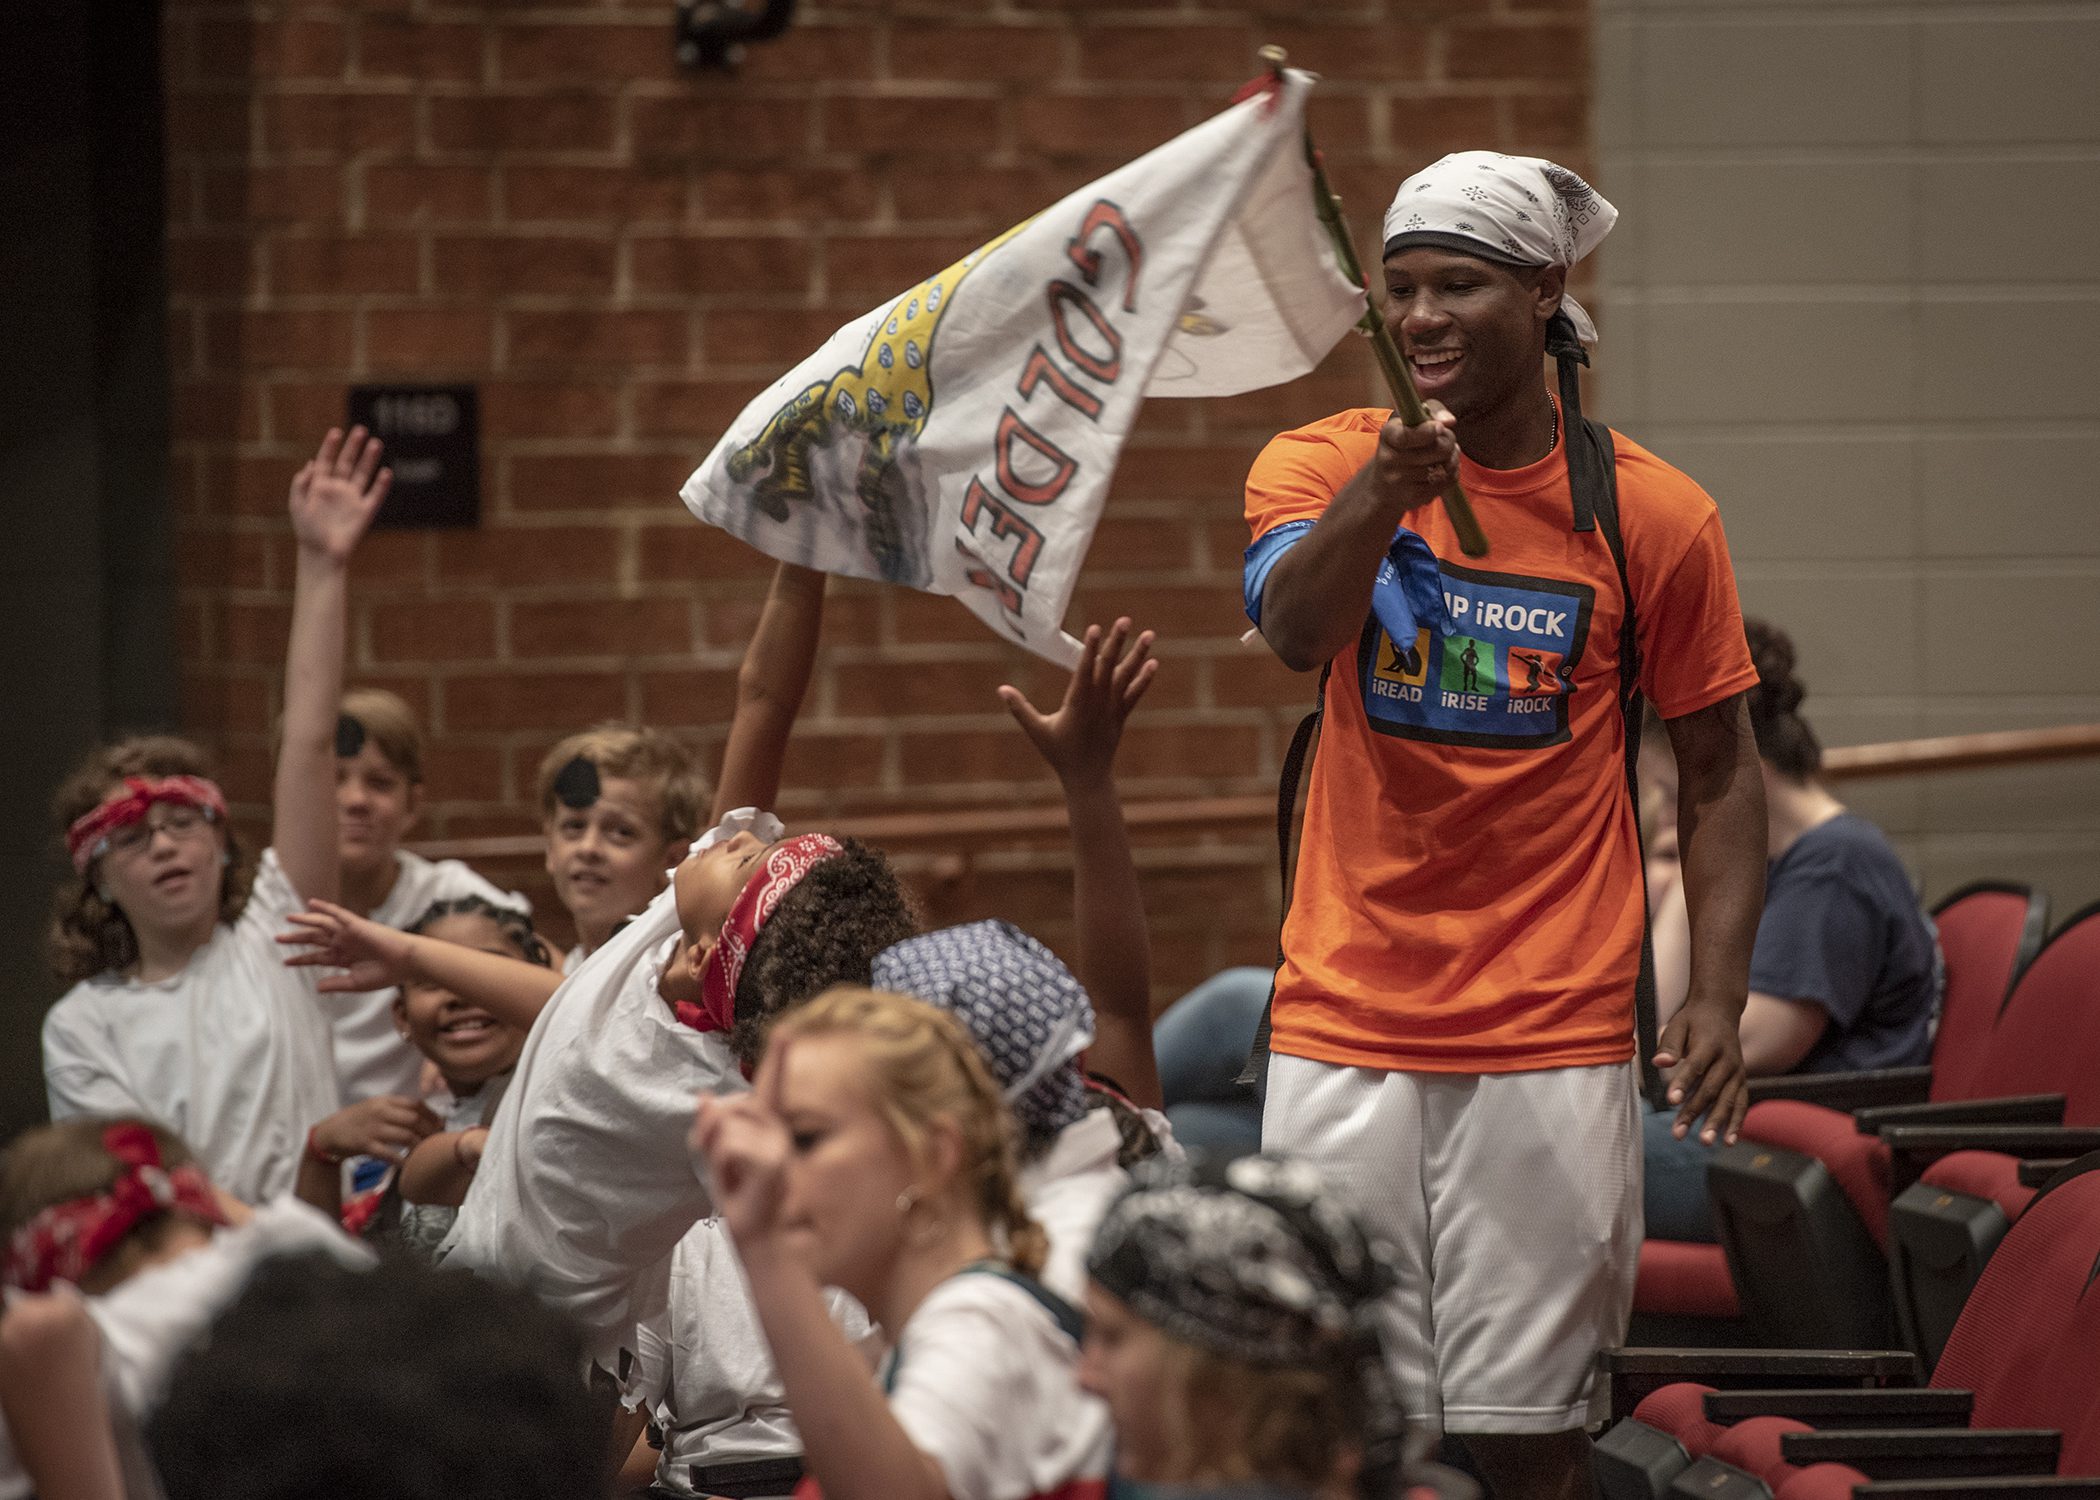 A young, Black male wearing an orange t-shirt waves a white flag that reads "Goldie" over a group of excited elementary-age children.